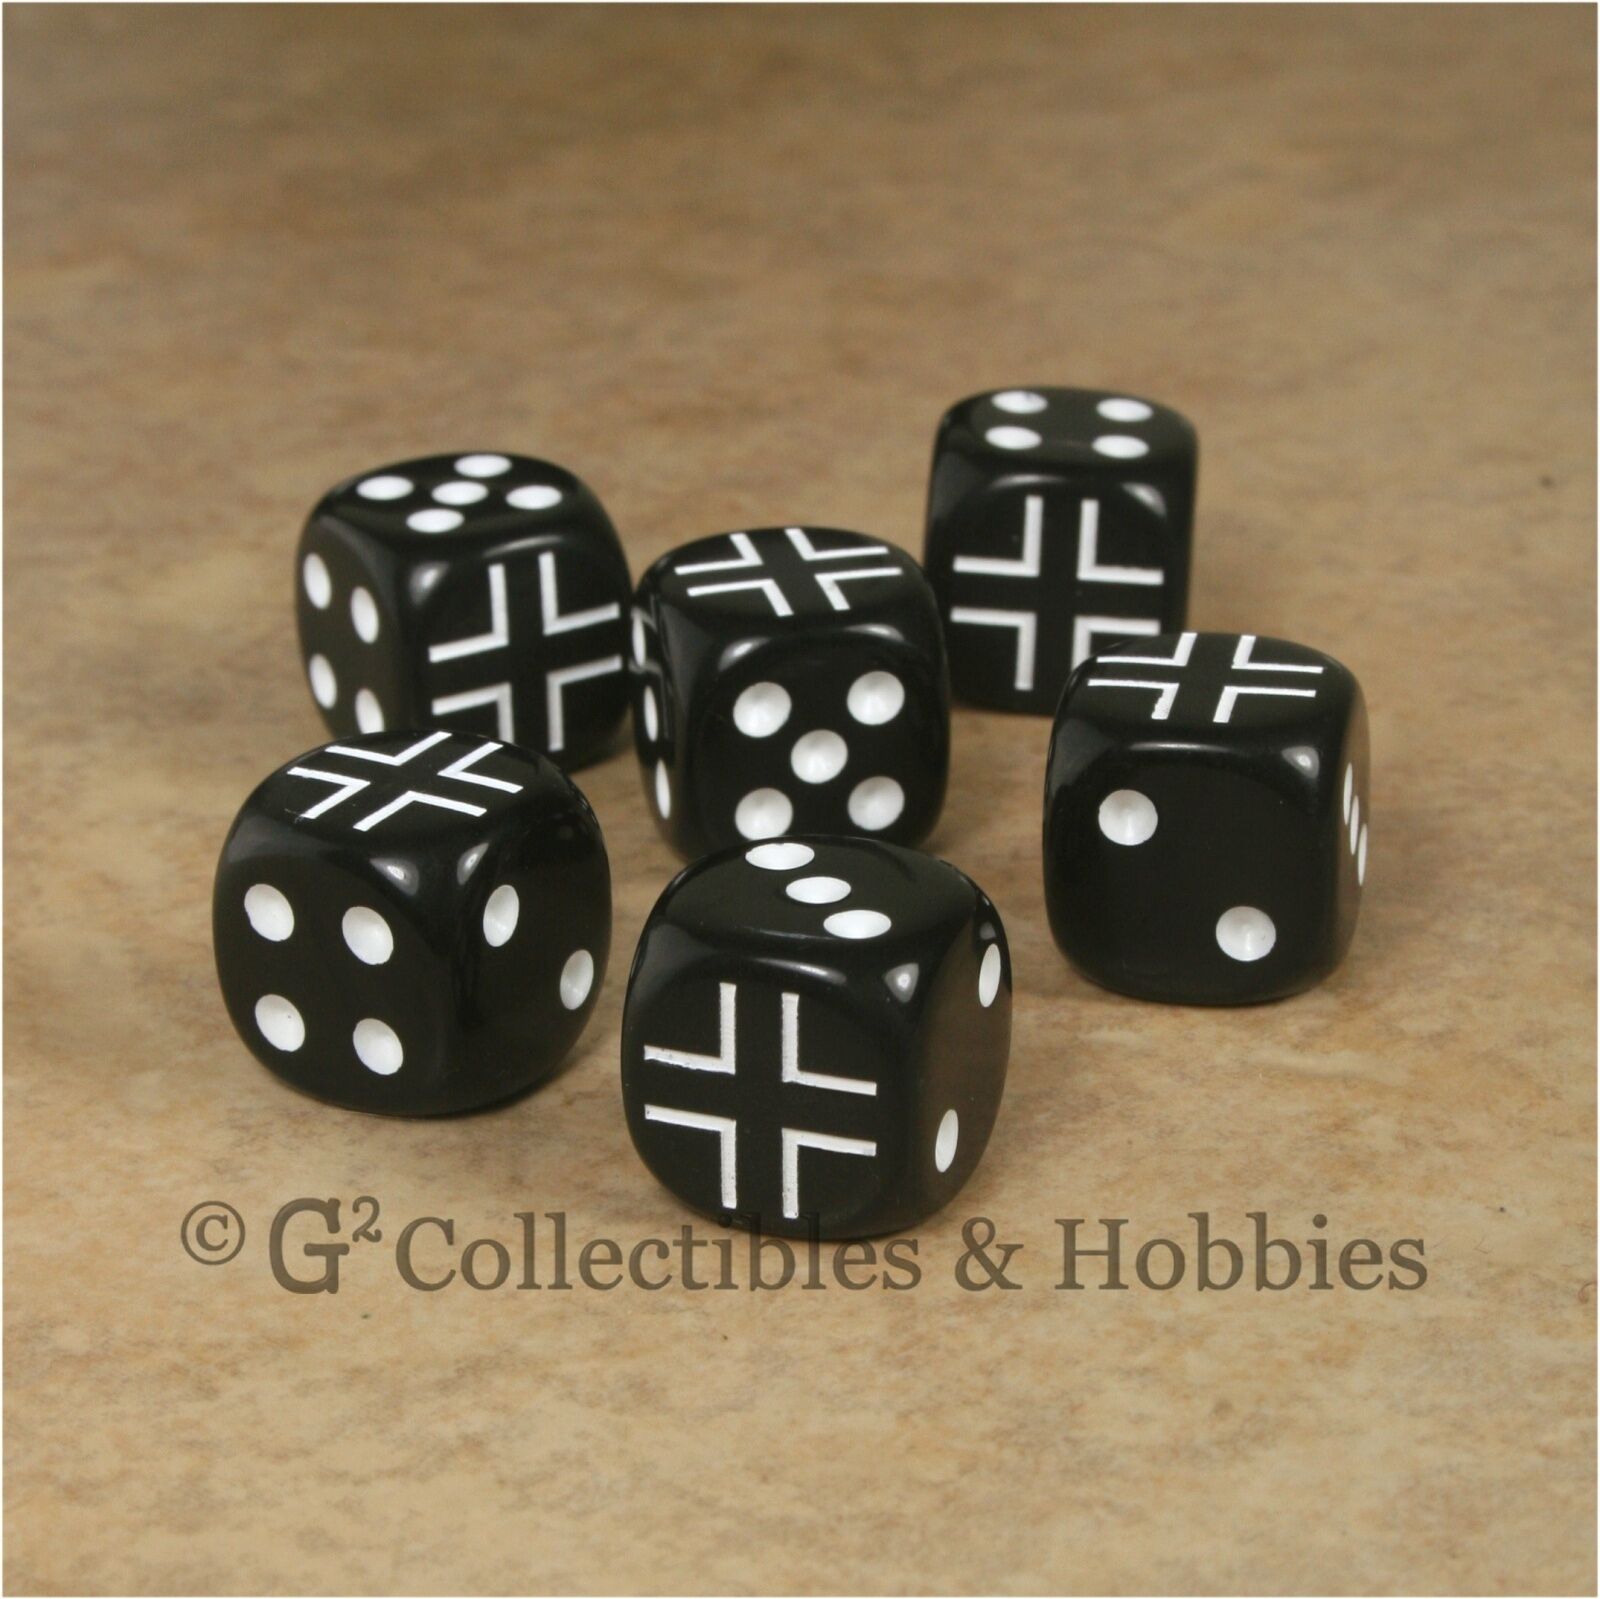 New 6 German Iron Cross Dice Set 16mm Rpg War Game D6 Wwii Germany Army